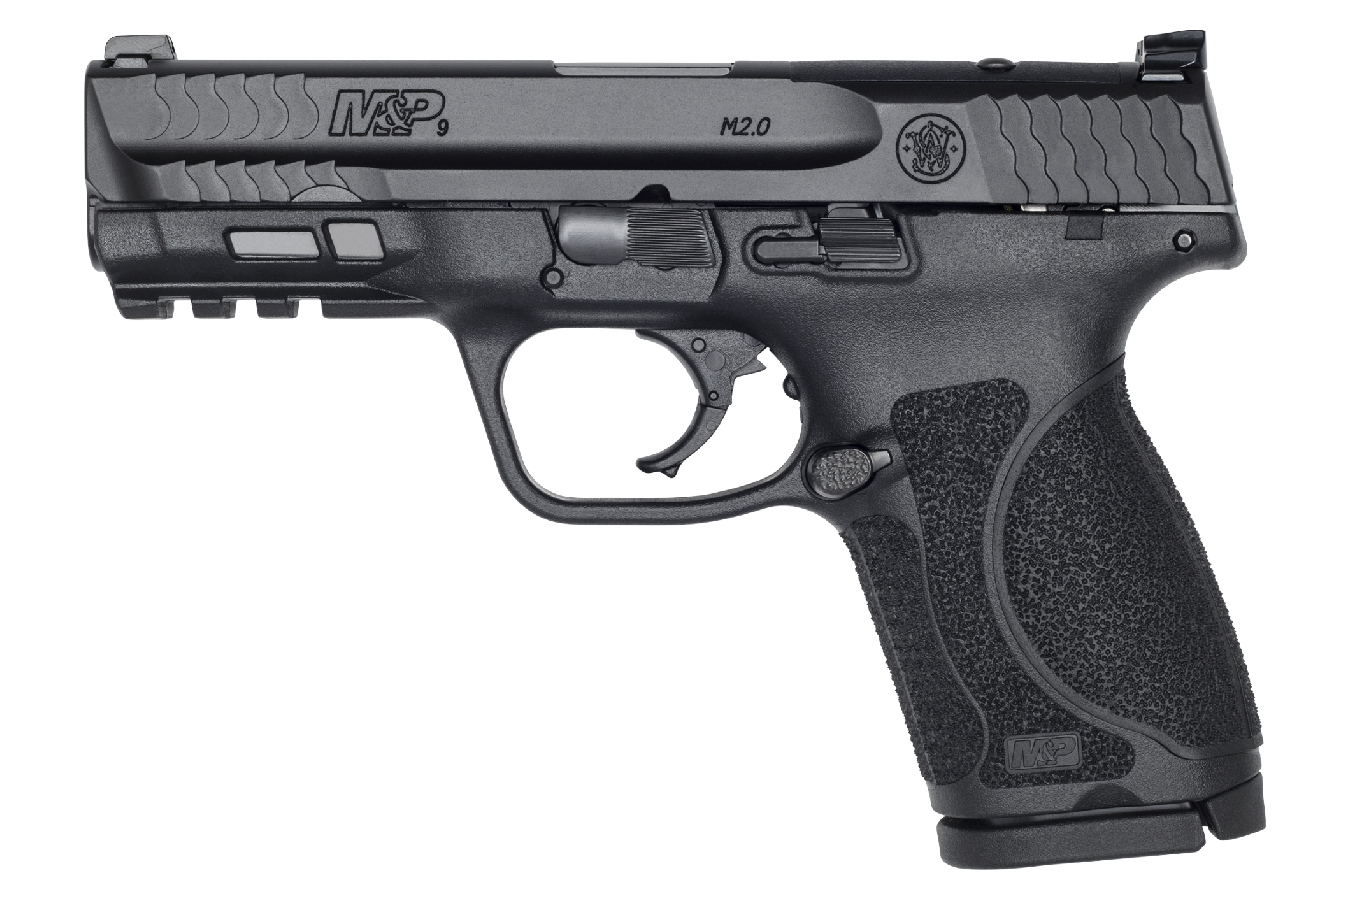 SMITH AND WESSON MP9 M2.0 COMPACT 9MM OPTICS READY PISTOL WITH NIGHT SIGHTS (LE)